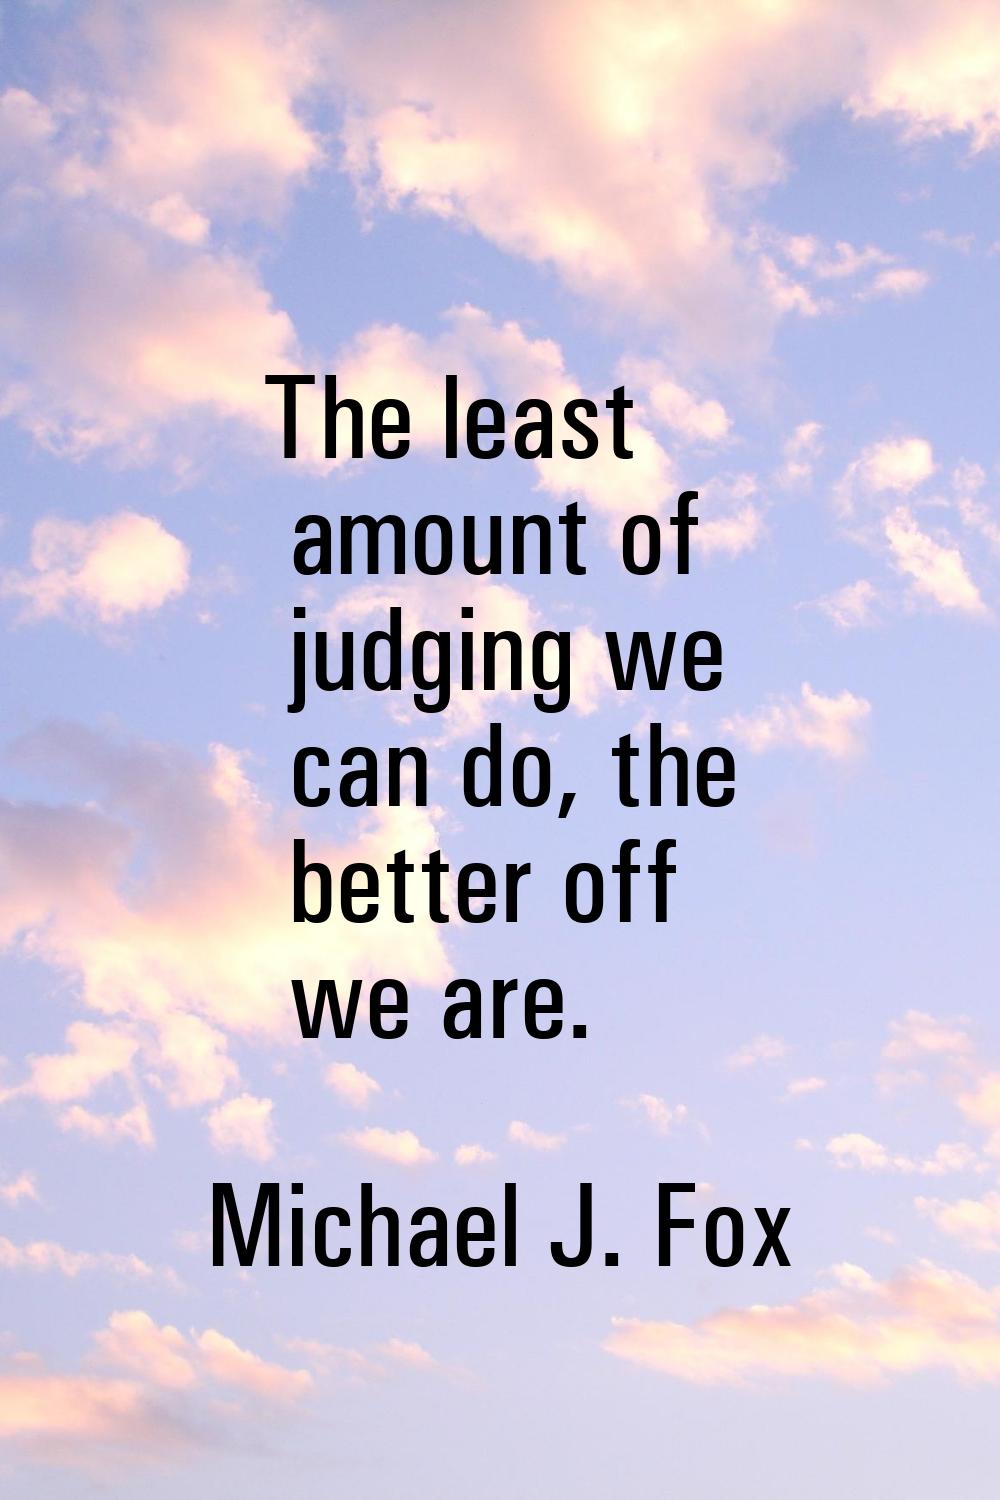 The least amount of judging we can do, the better off we are.